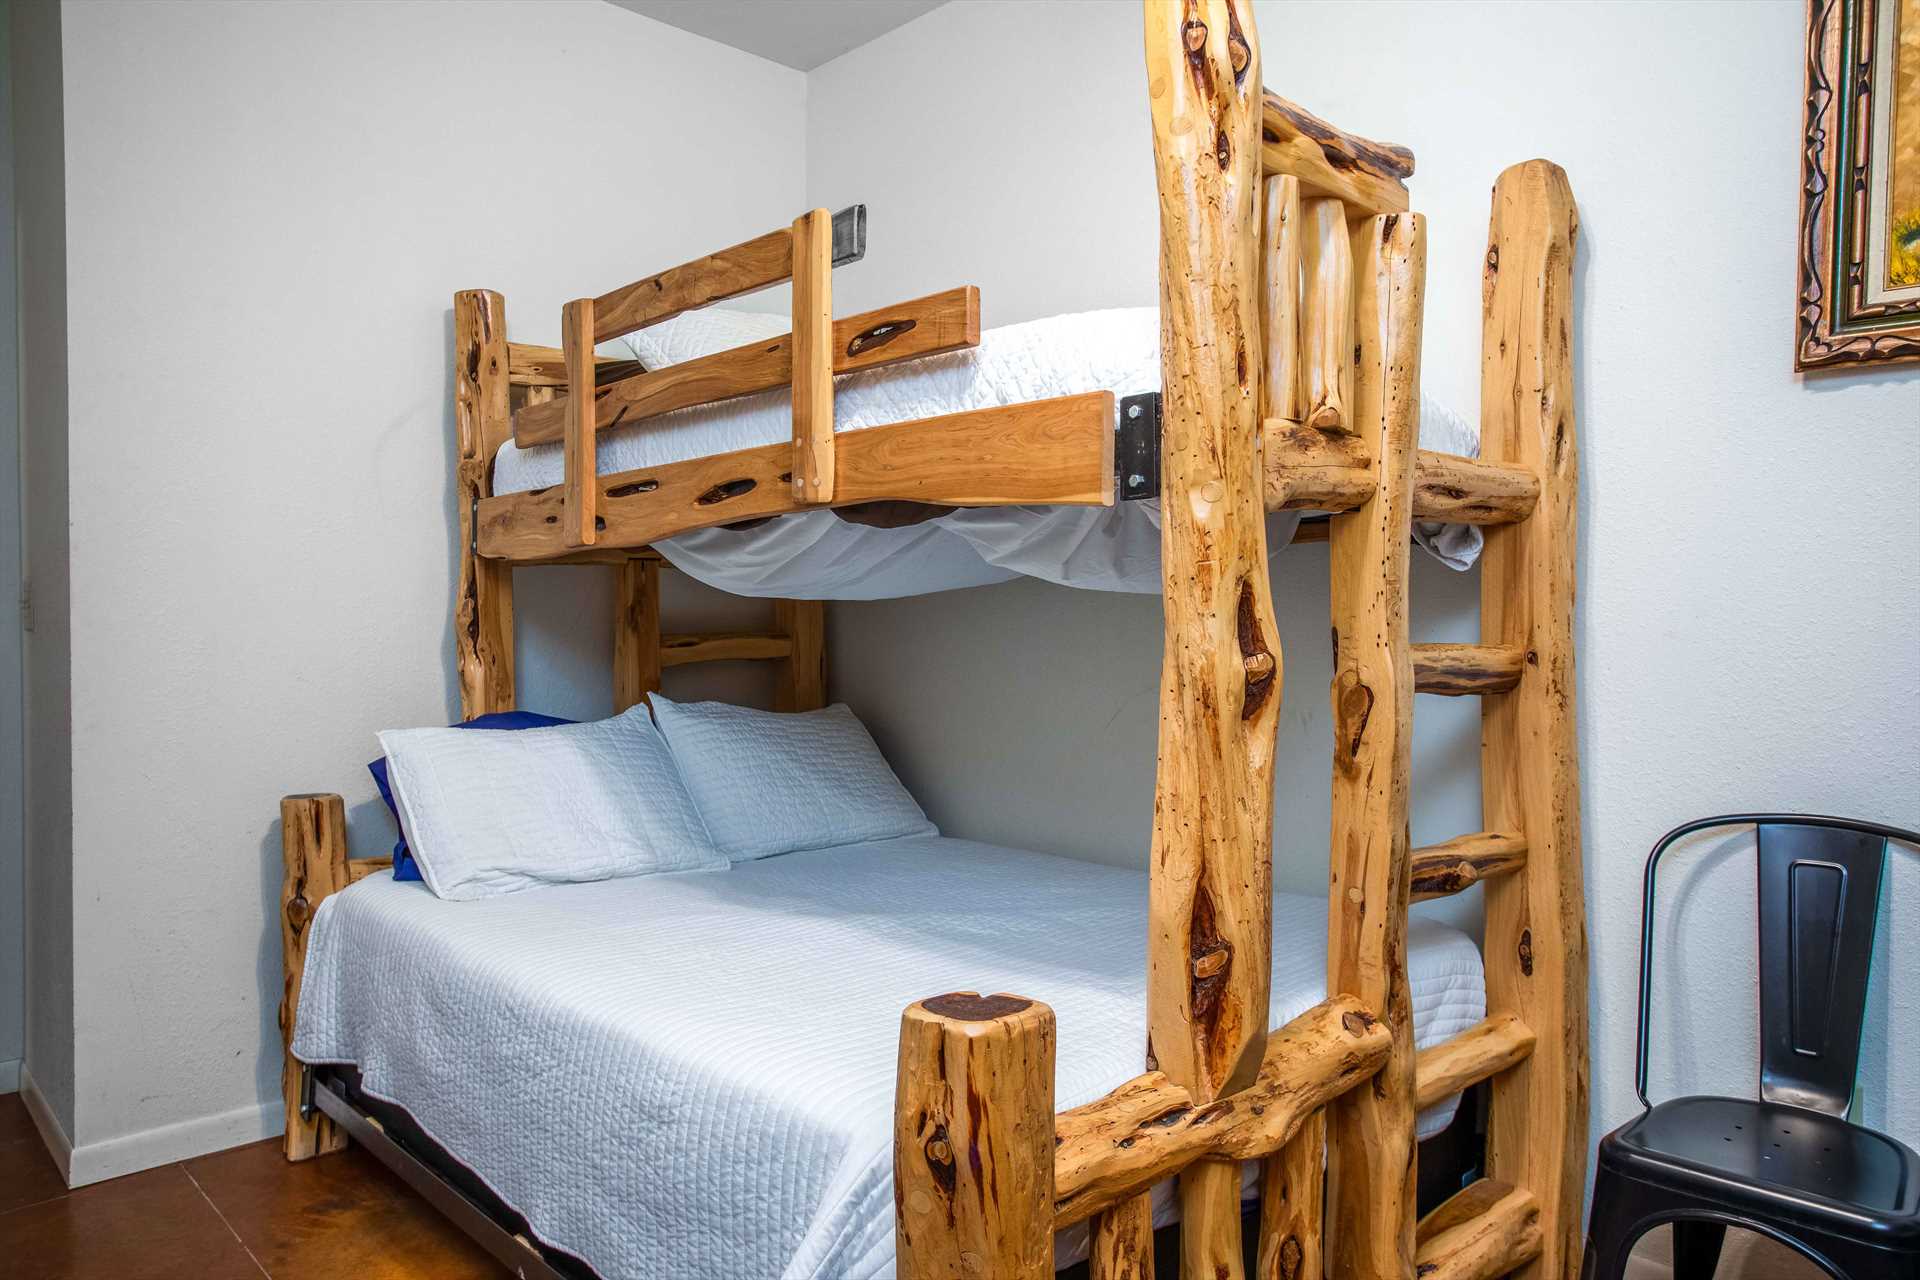                                                 Here's a closer look at one of the full/twin bunk bed setups. They comfortable sleep two people below, and one above.